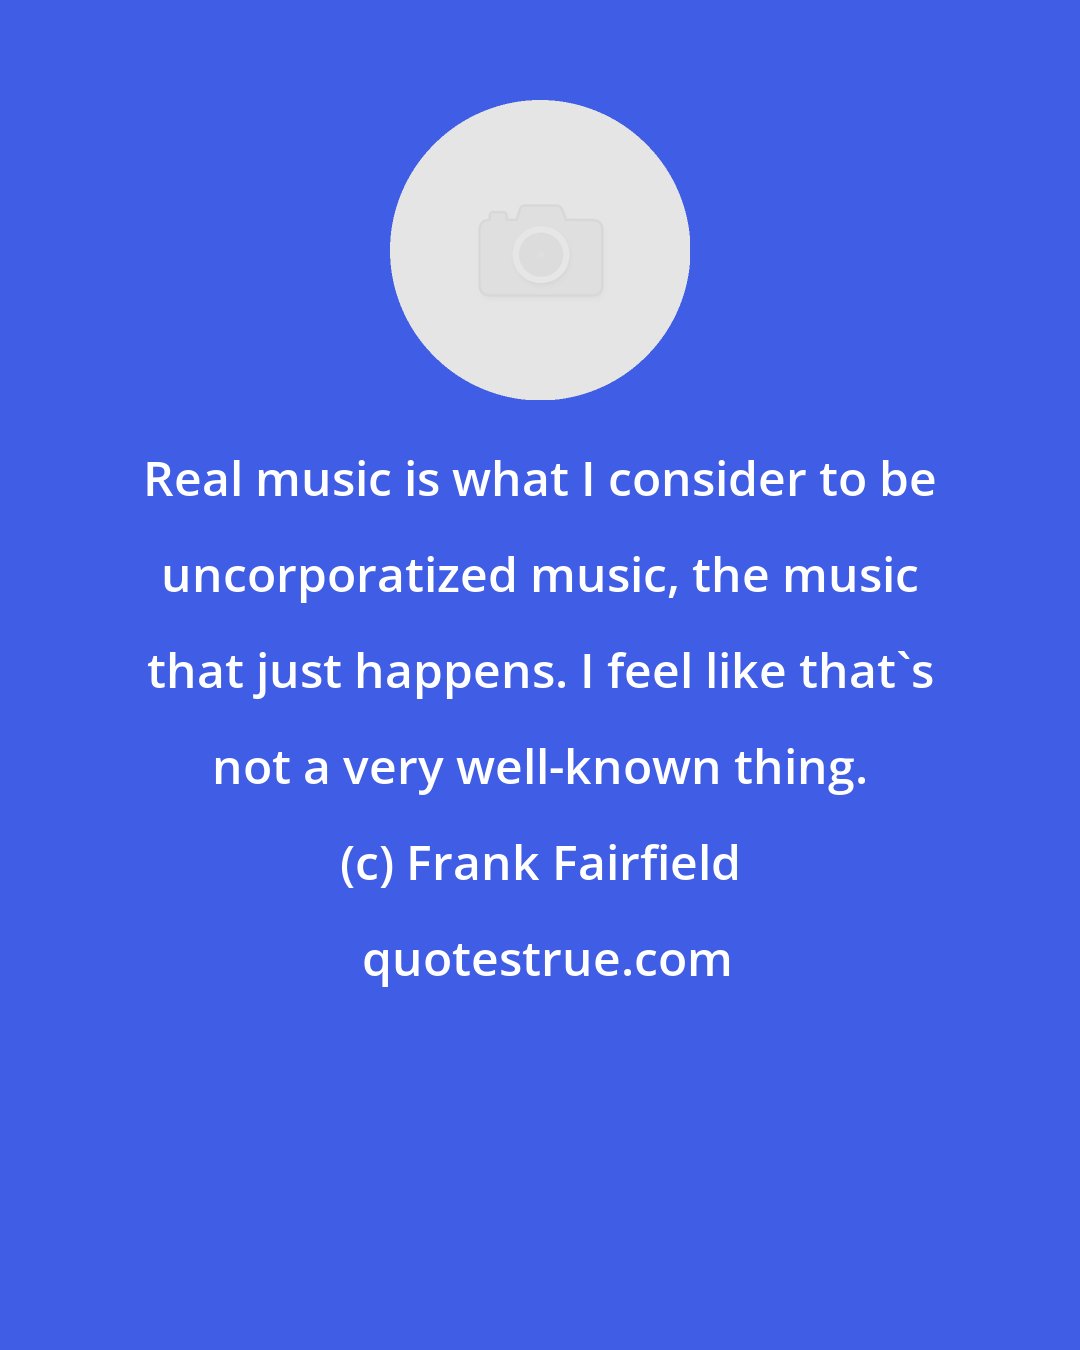 Frank Fairfield: Real music is what I consider to be uncorporatized music, the music that just happens. I feel like that's not a very well-known thing.